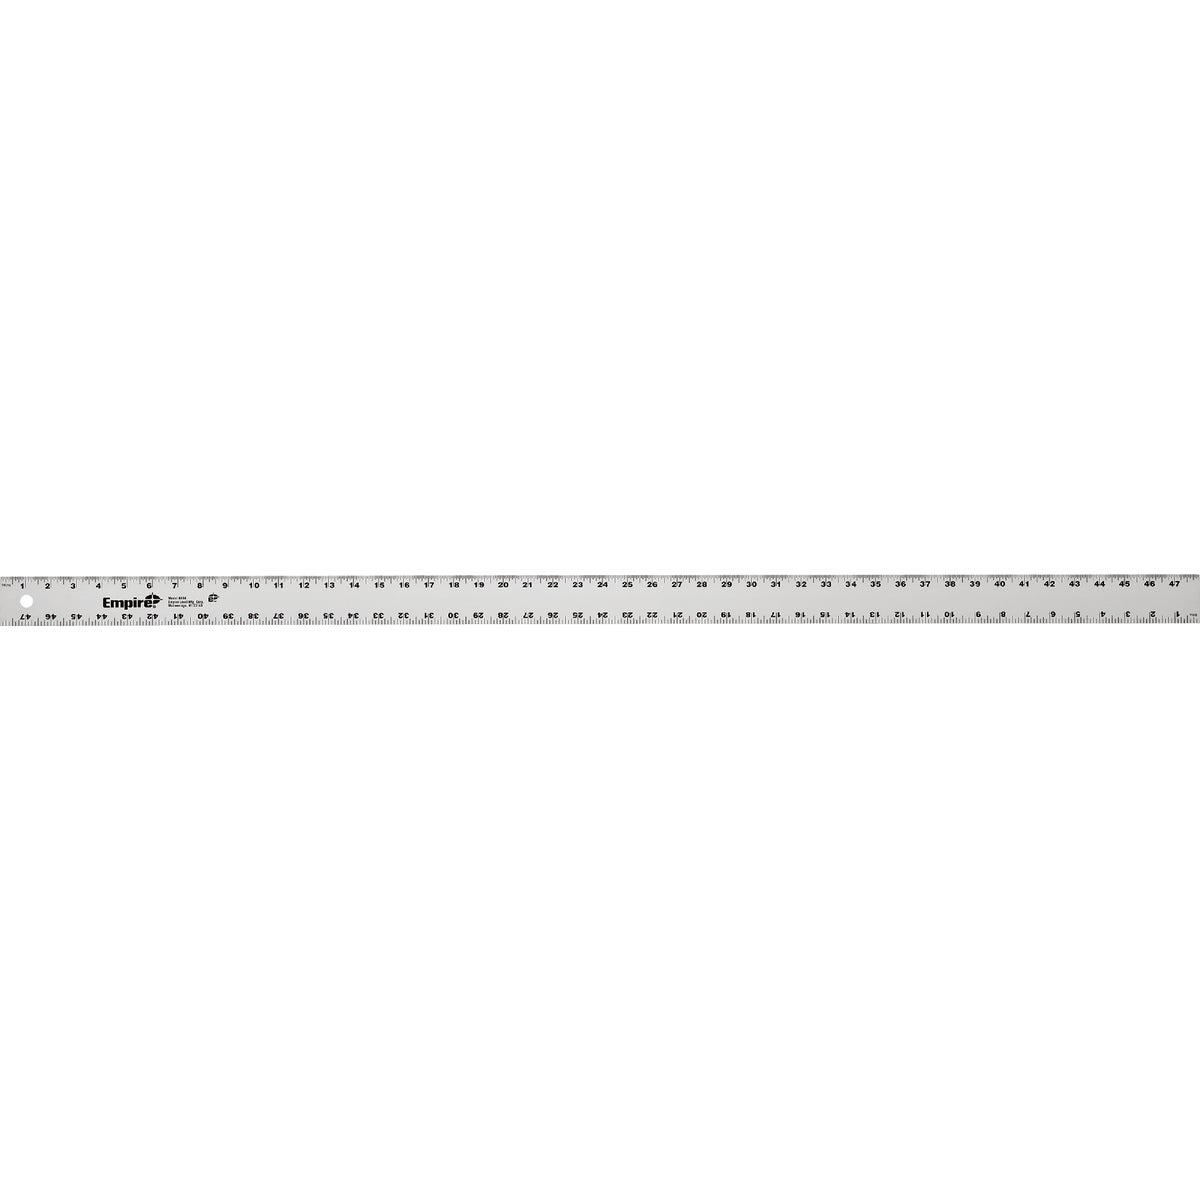 Item 303379, Heavy-duty aluminum frame straight edge with easy-to-read inch scale 